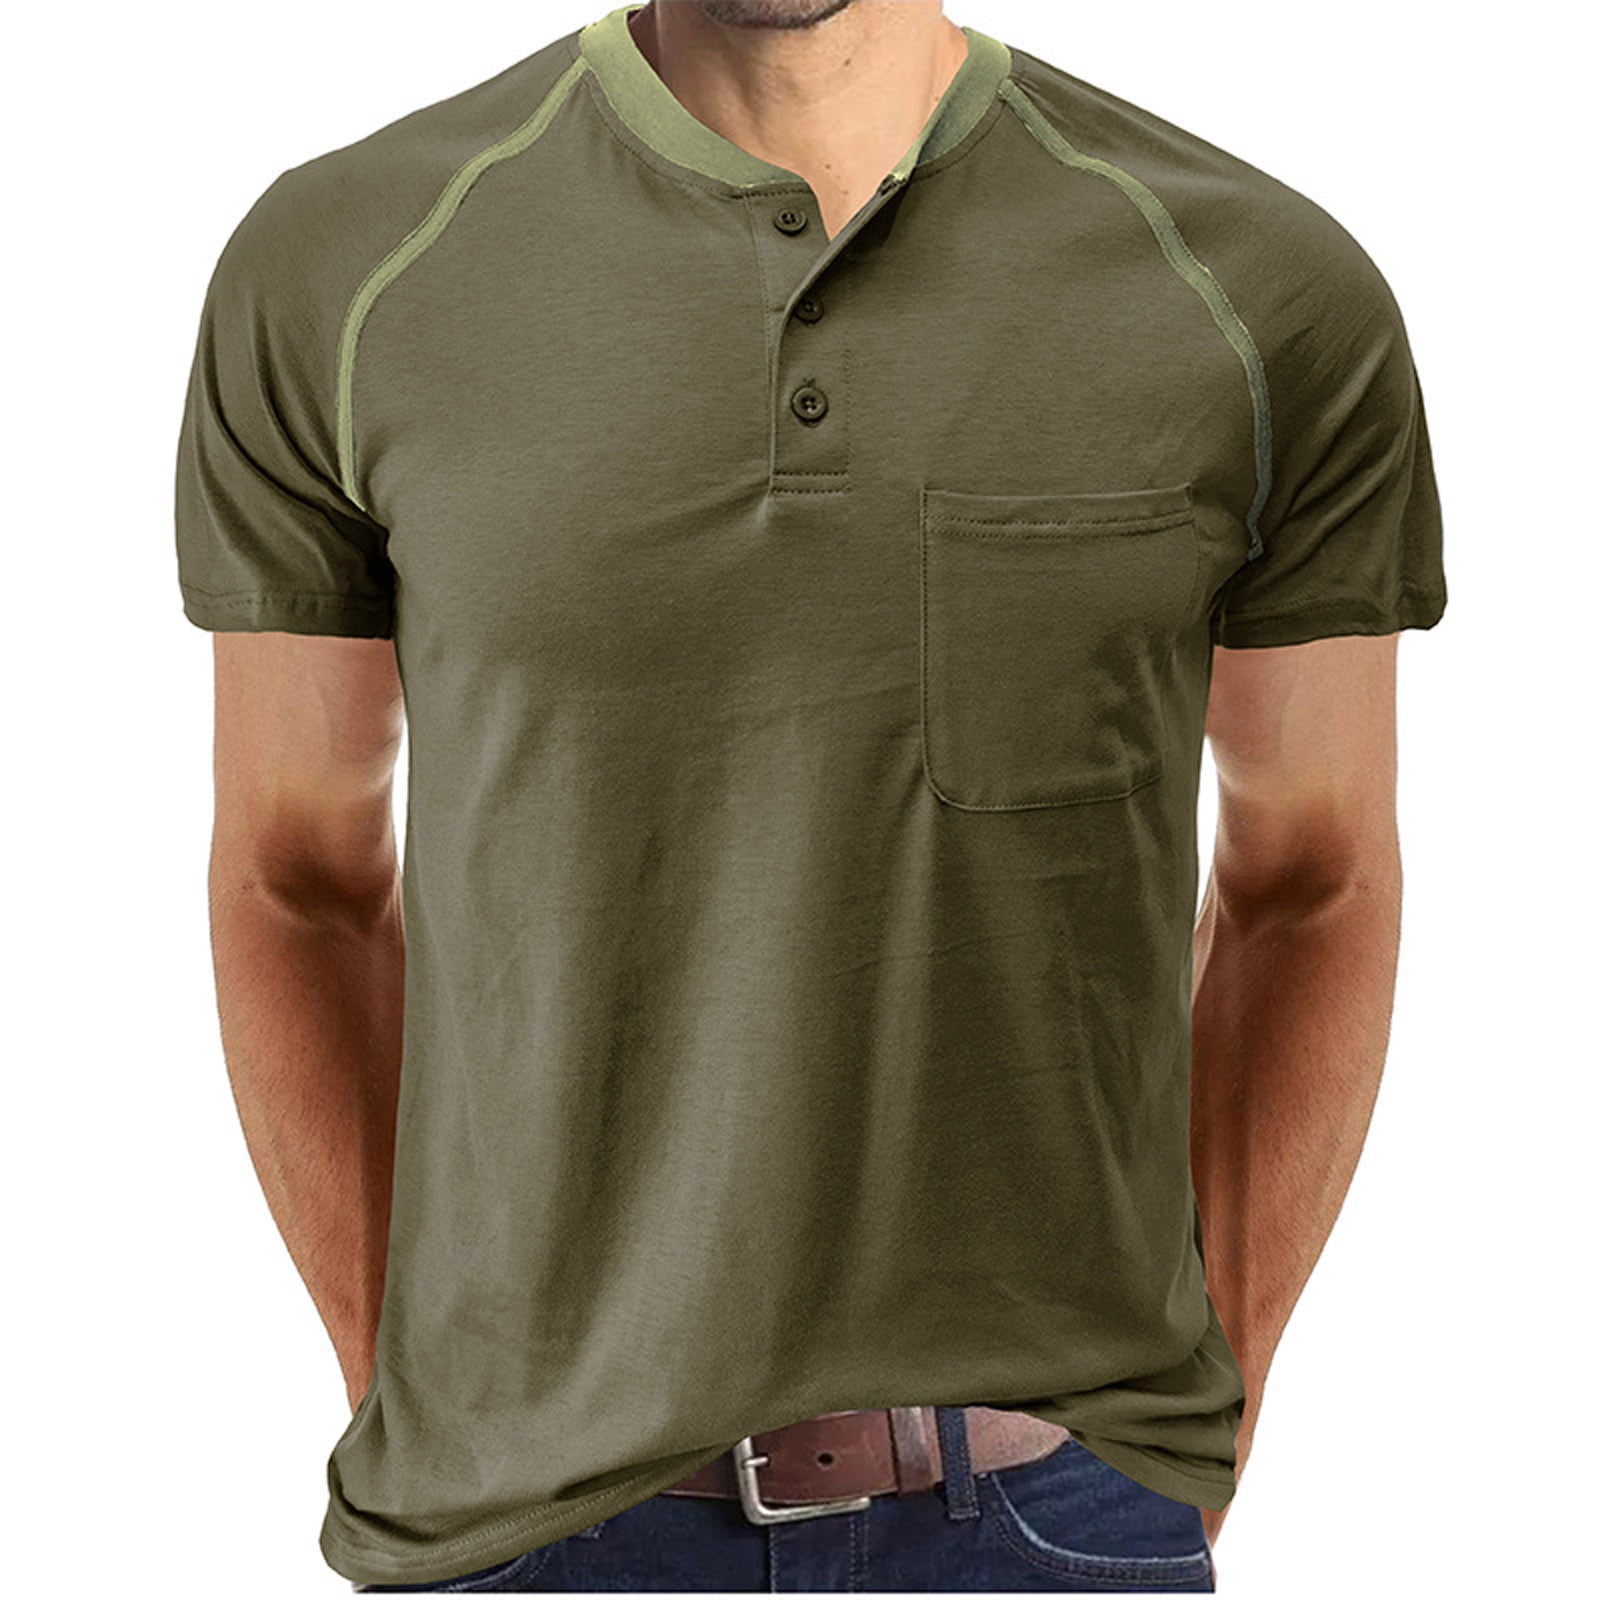 Big Brother Shirt for Toddler/Henley Shirts for Men, Classic Basic Fit  T-Shirt Men's Tee Shirt Top Crewneck Short Sleeve Tops,Button Down Shirt  Men Army Green at  Men's Clothing store